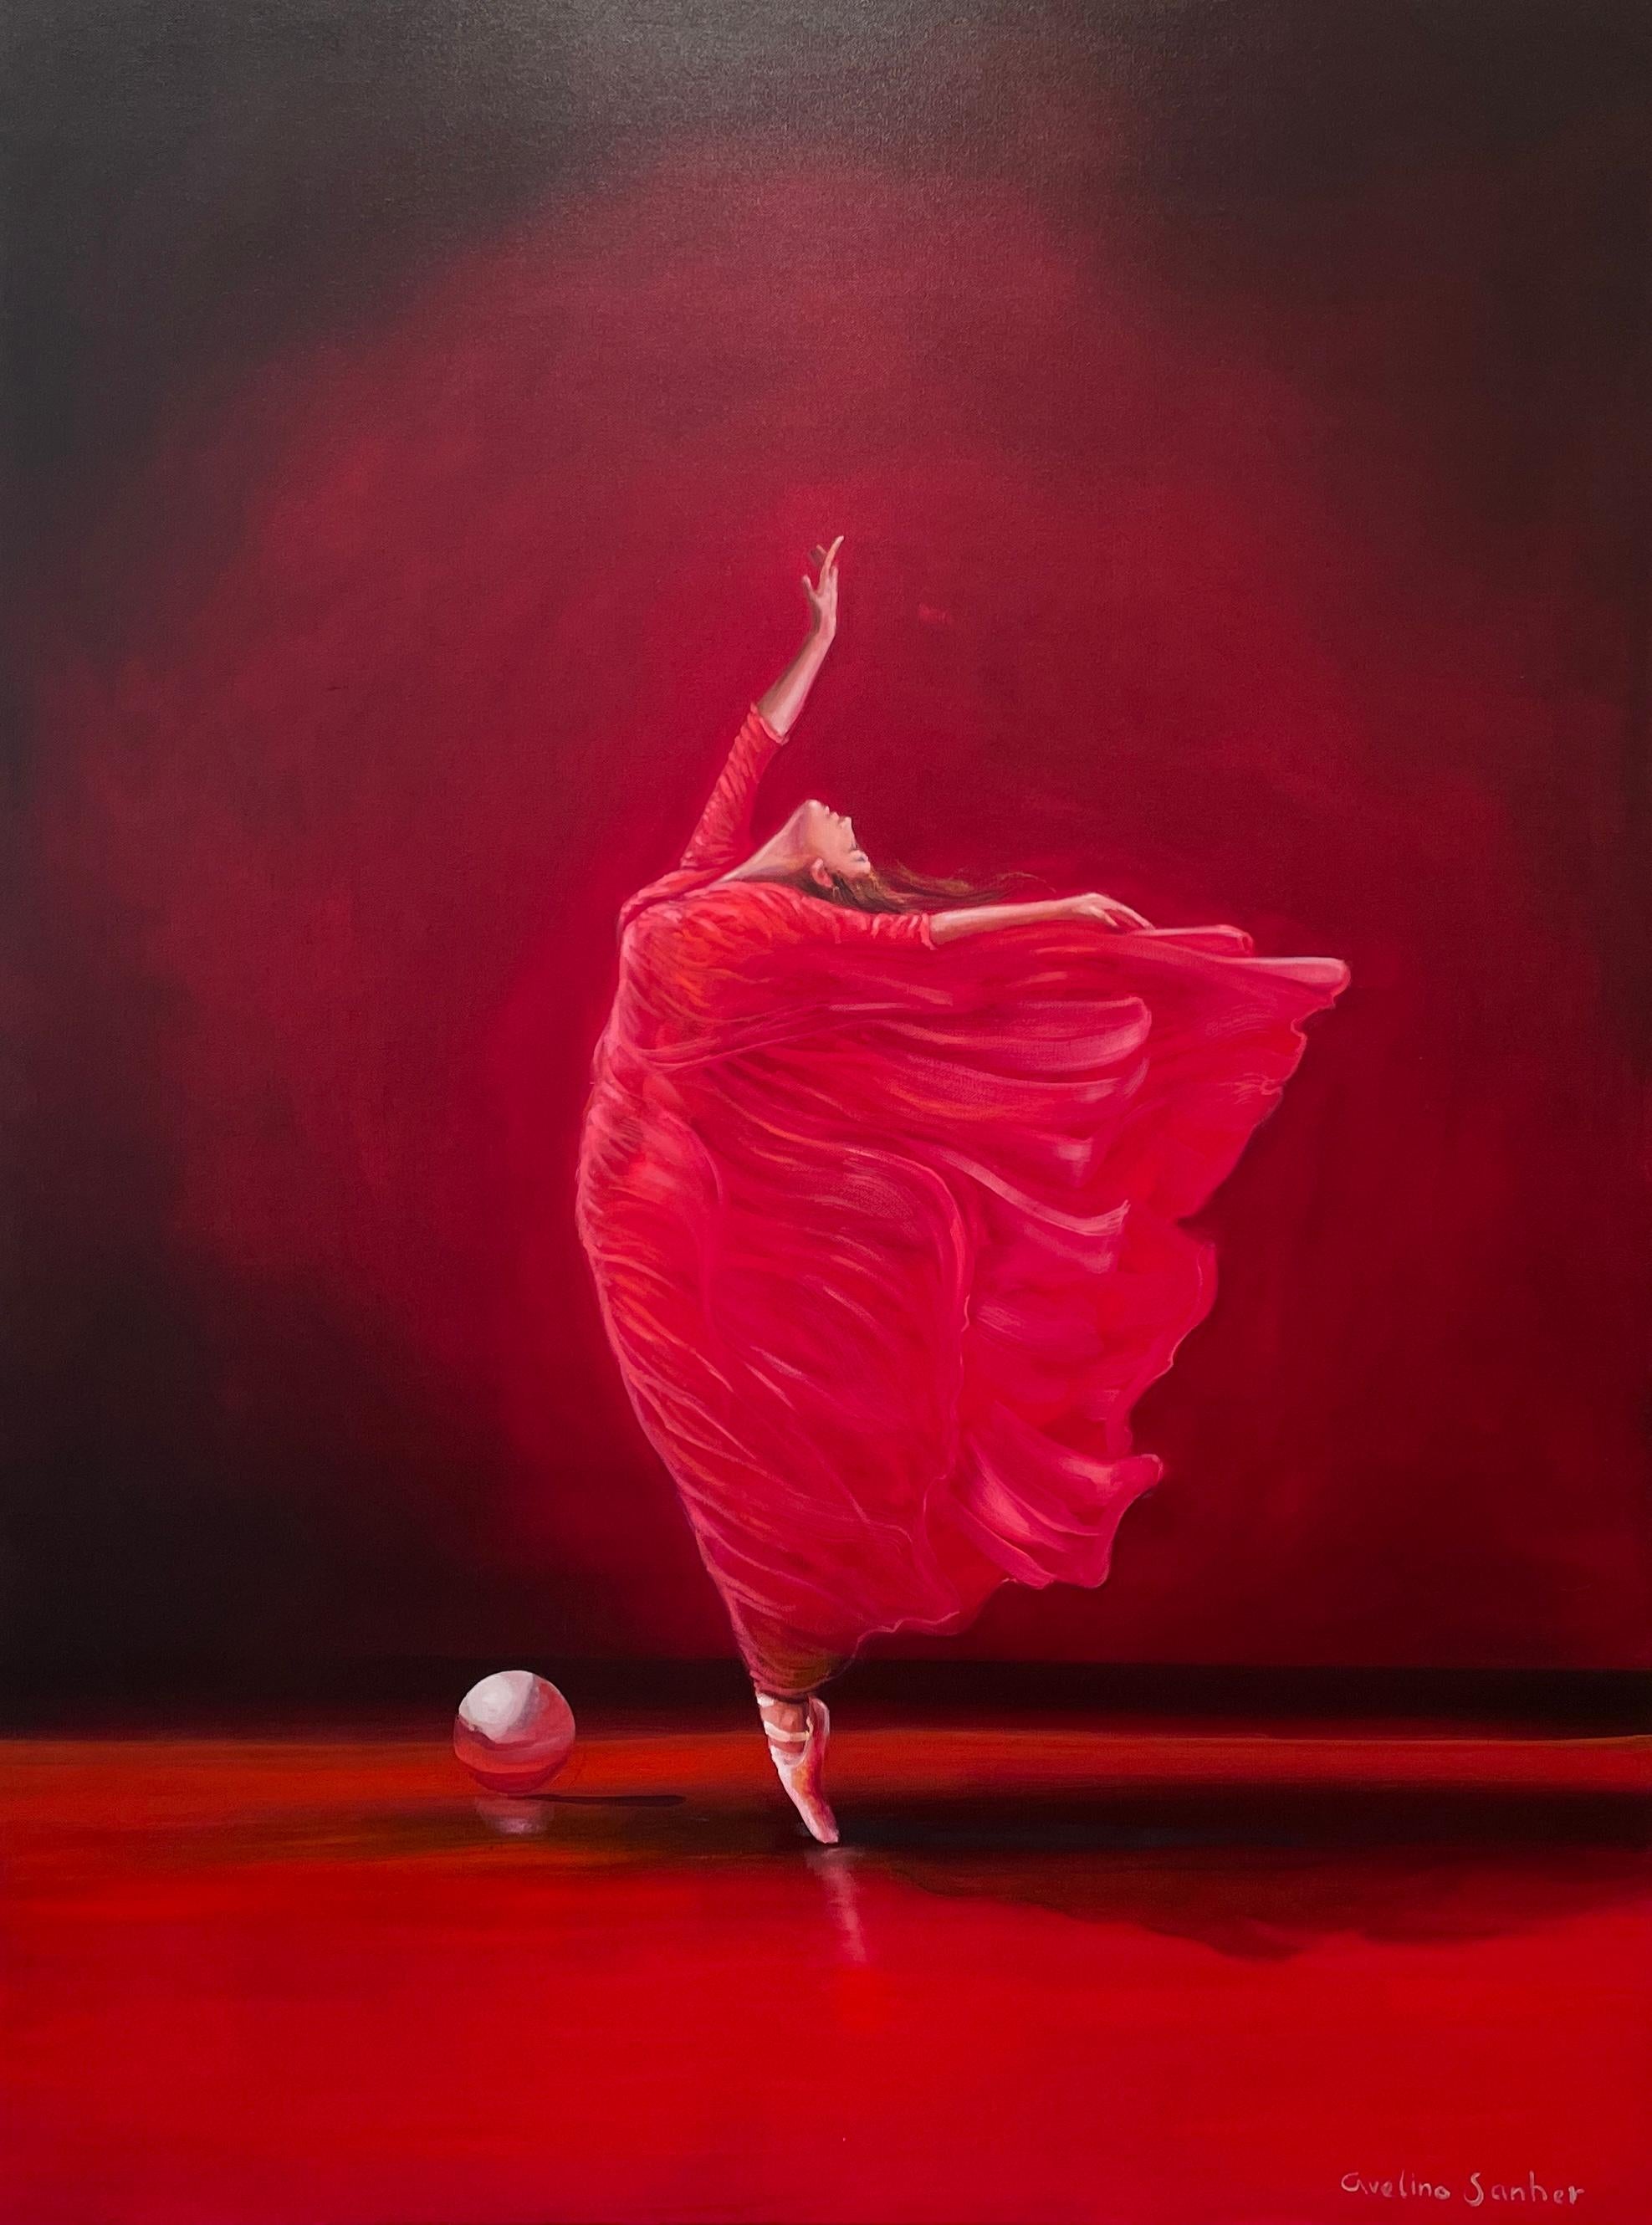 Avelino Sanher Figurative Painting - 'Passione' - Ballerina in Red - The Ballet Series - Figurative Oil Painting